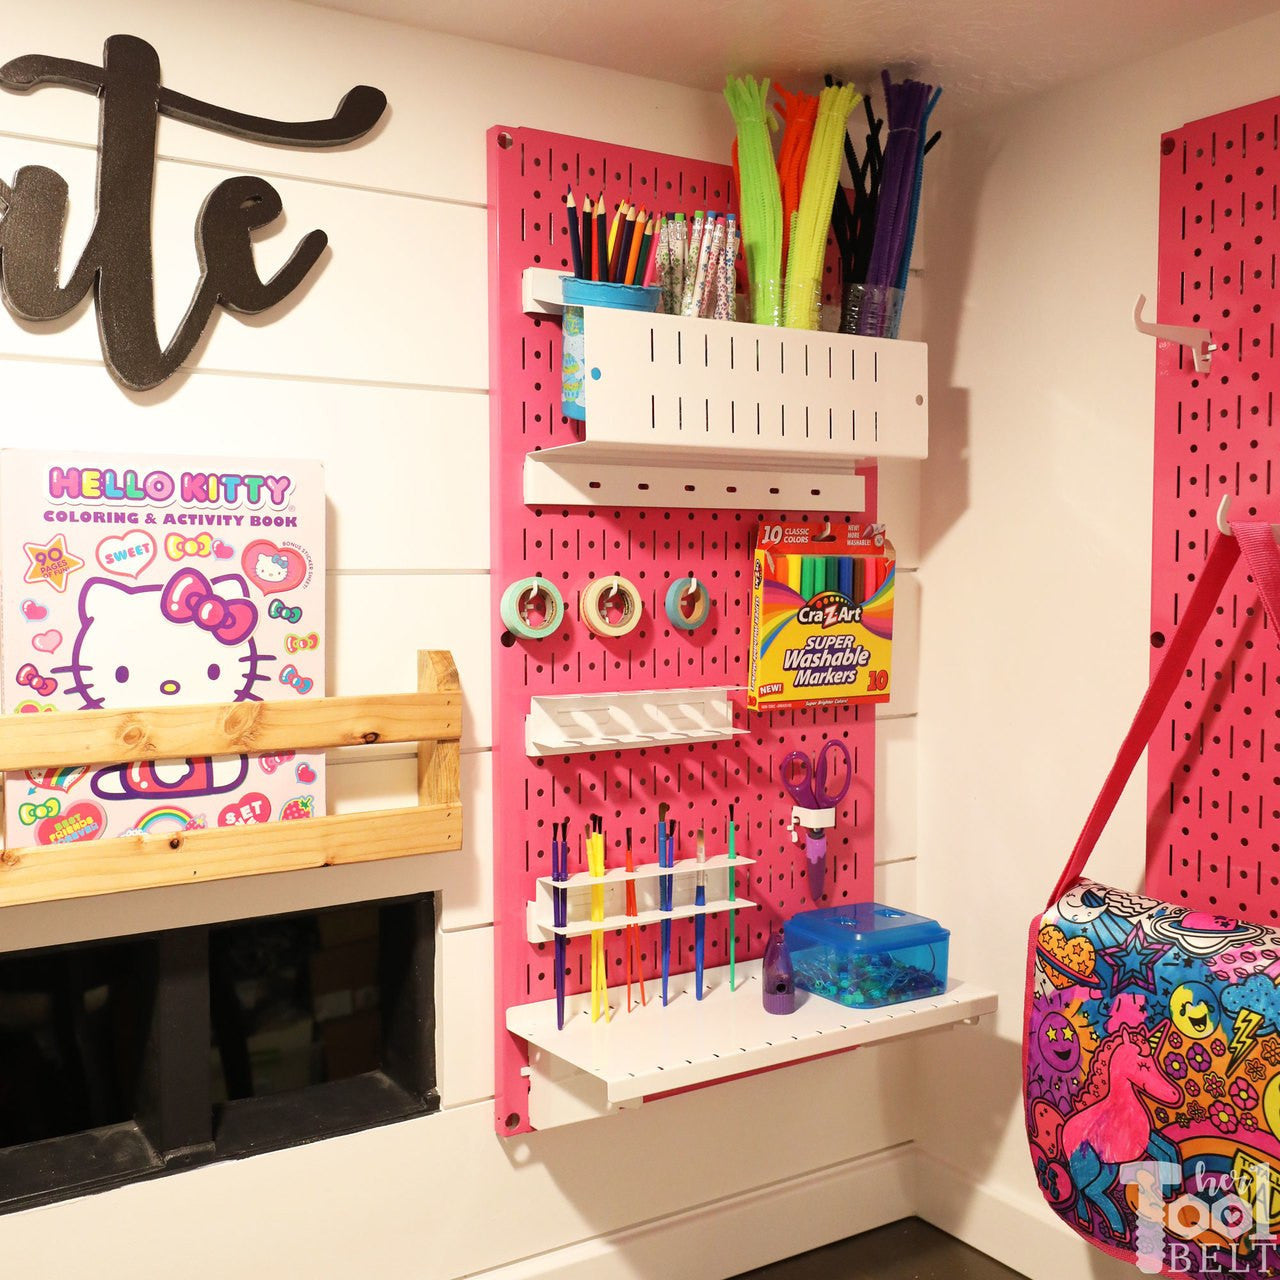 Her Tool Belt - Kids Playroom with Pink Pegboard